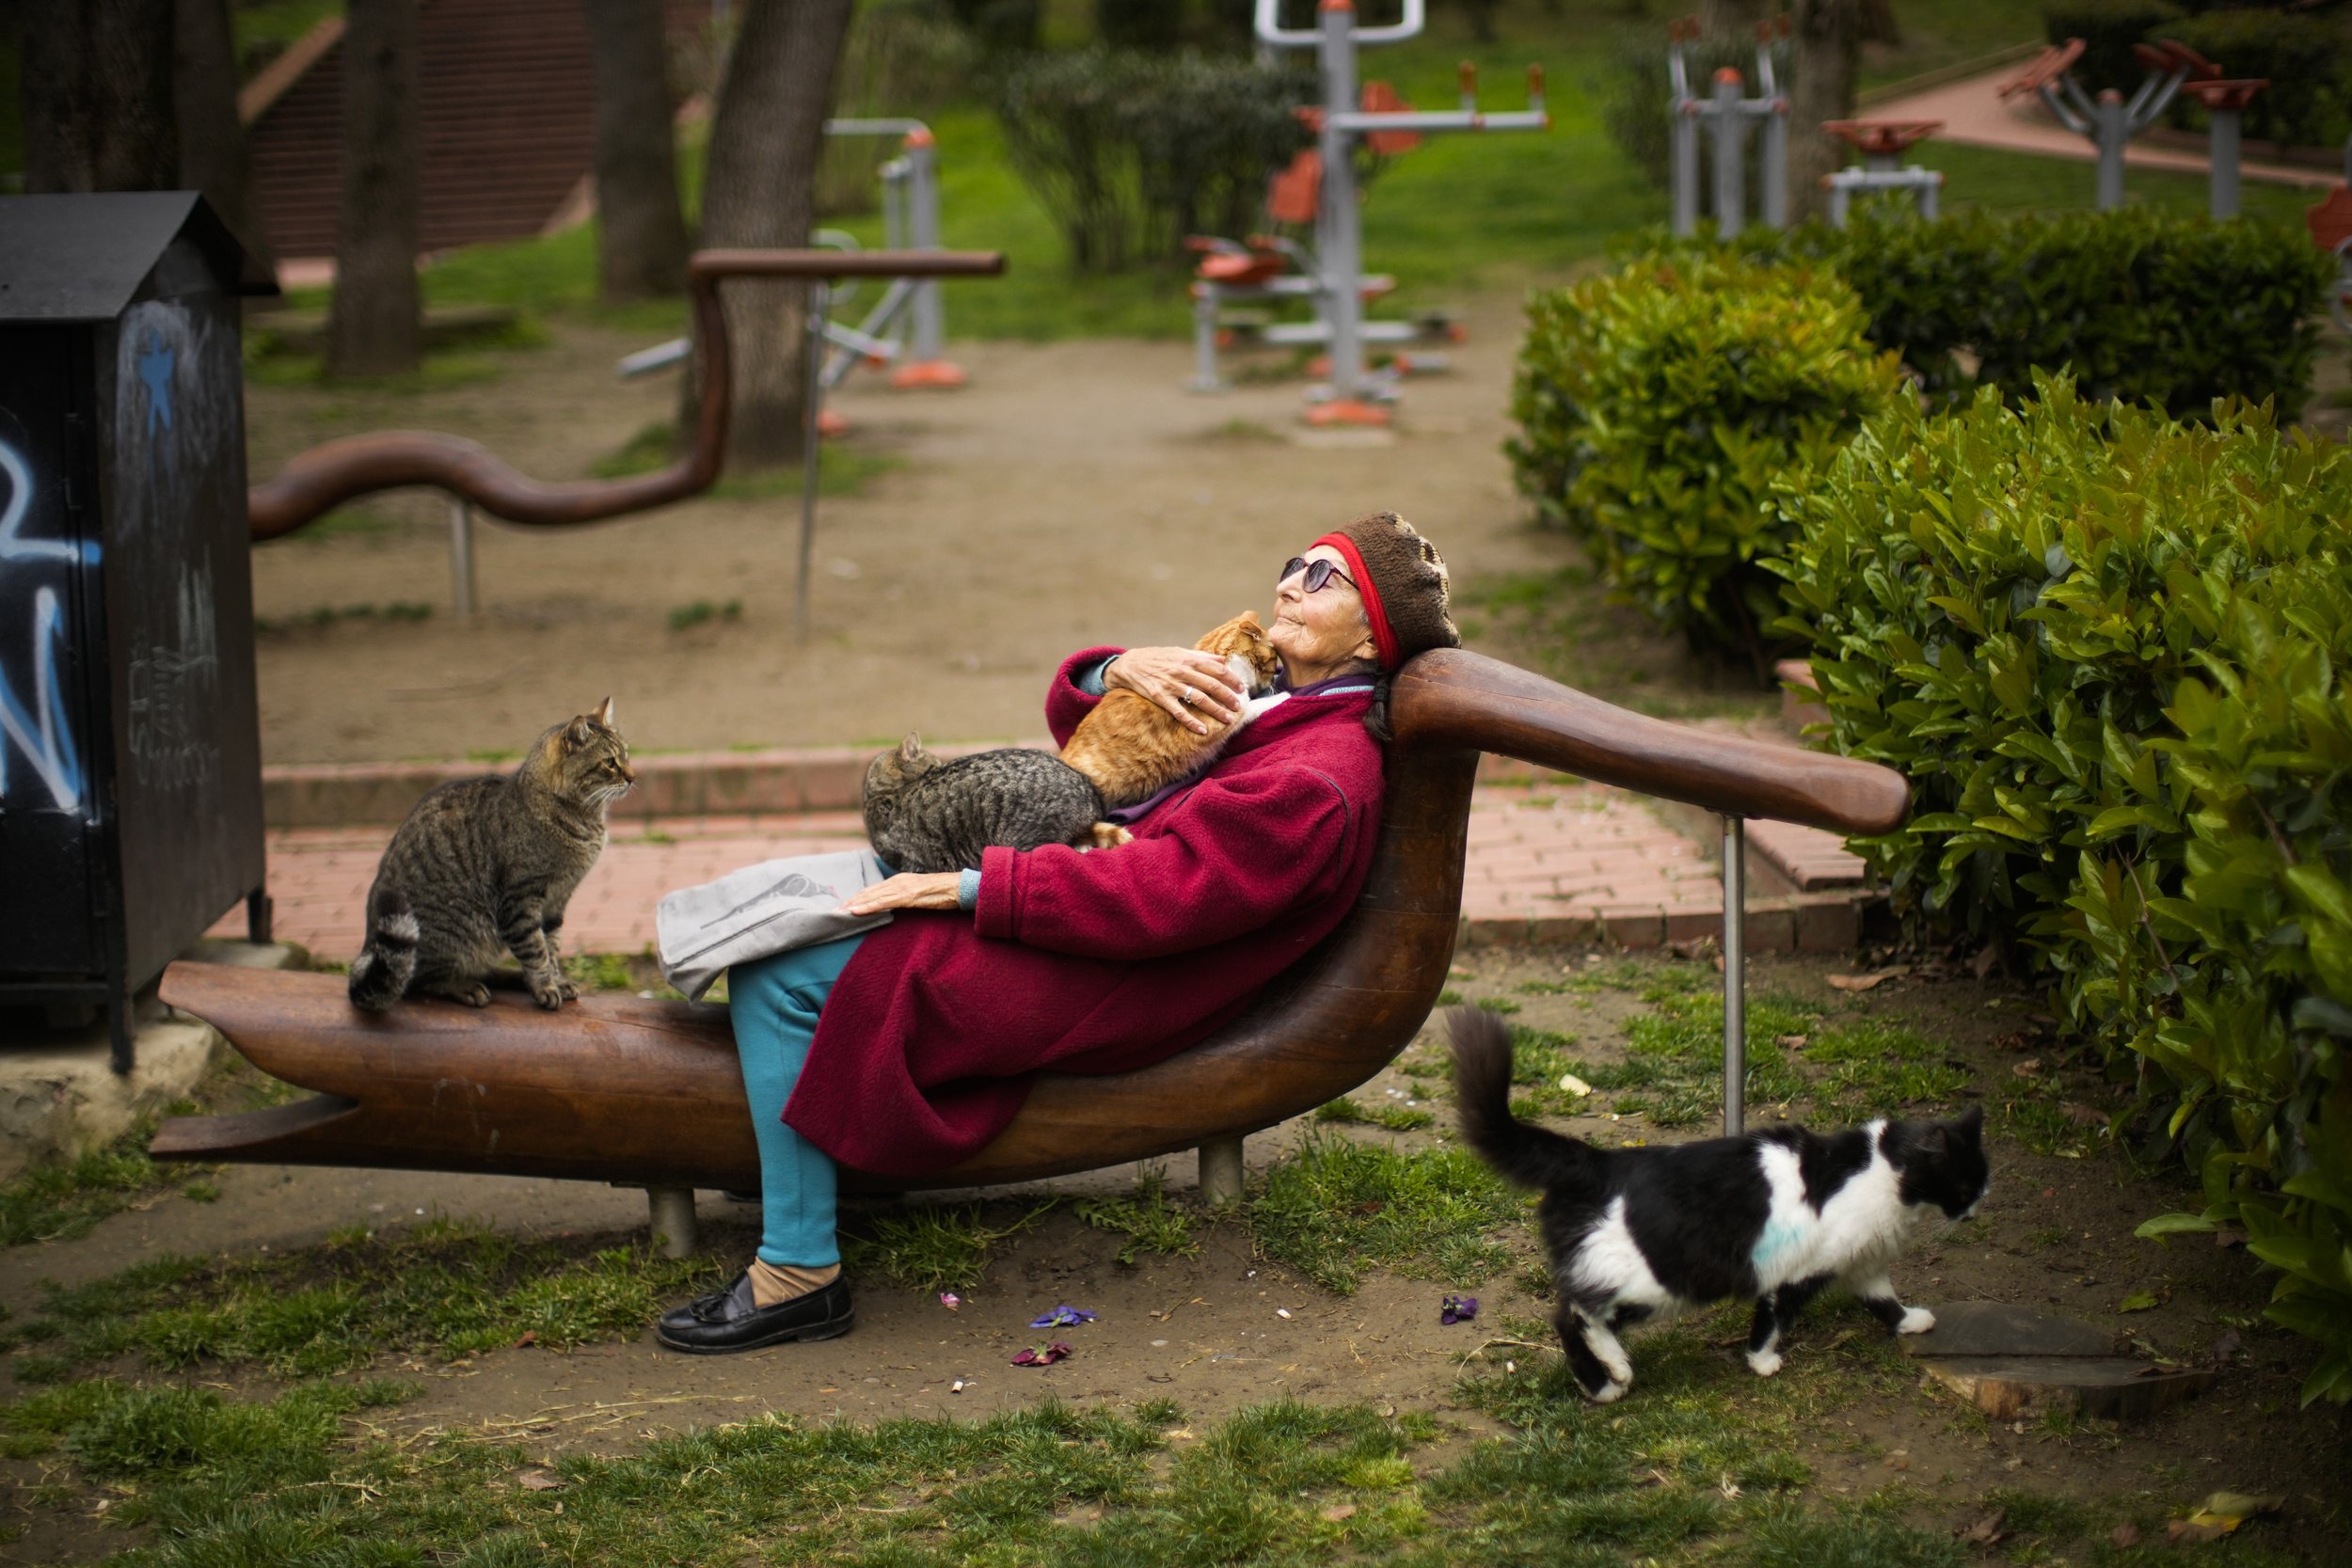  Tiraje Kestelli lies on a seat in the company of some of the many cats she cares for at Macka park in Istanbul, Turkey, on March 23, 2023. (AP Photo/Francisco Seco) 